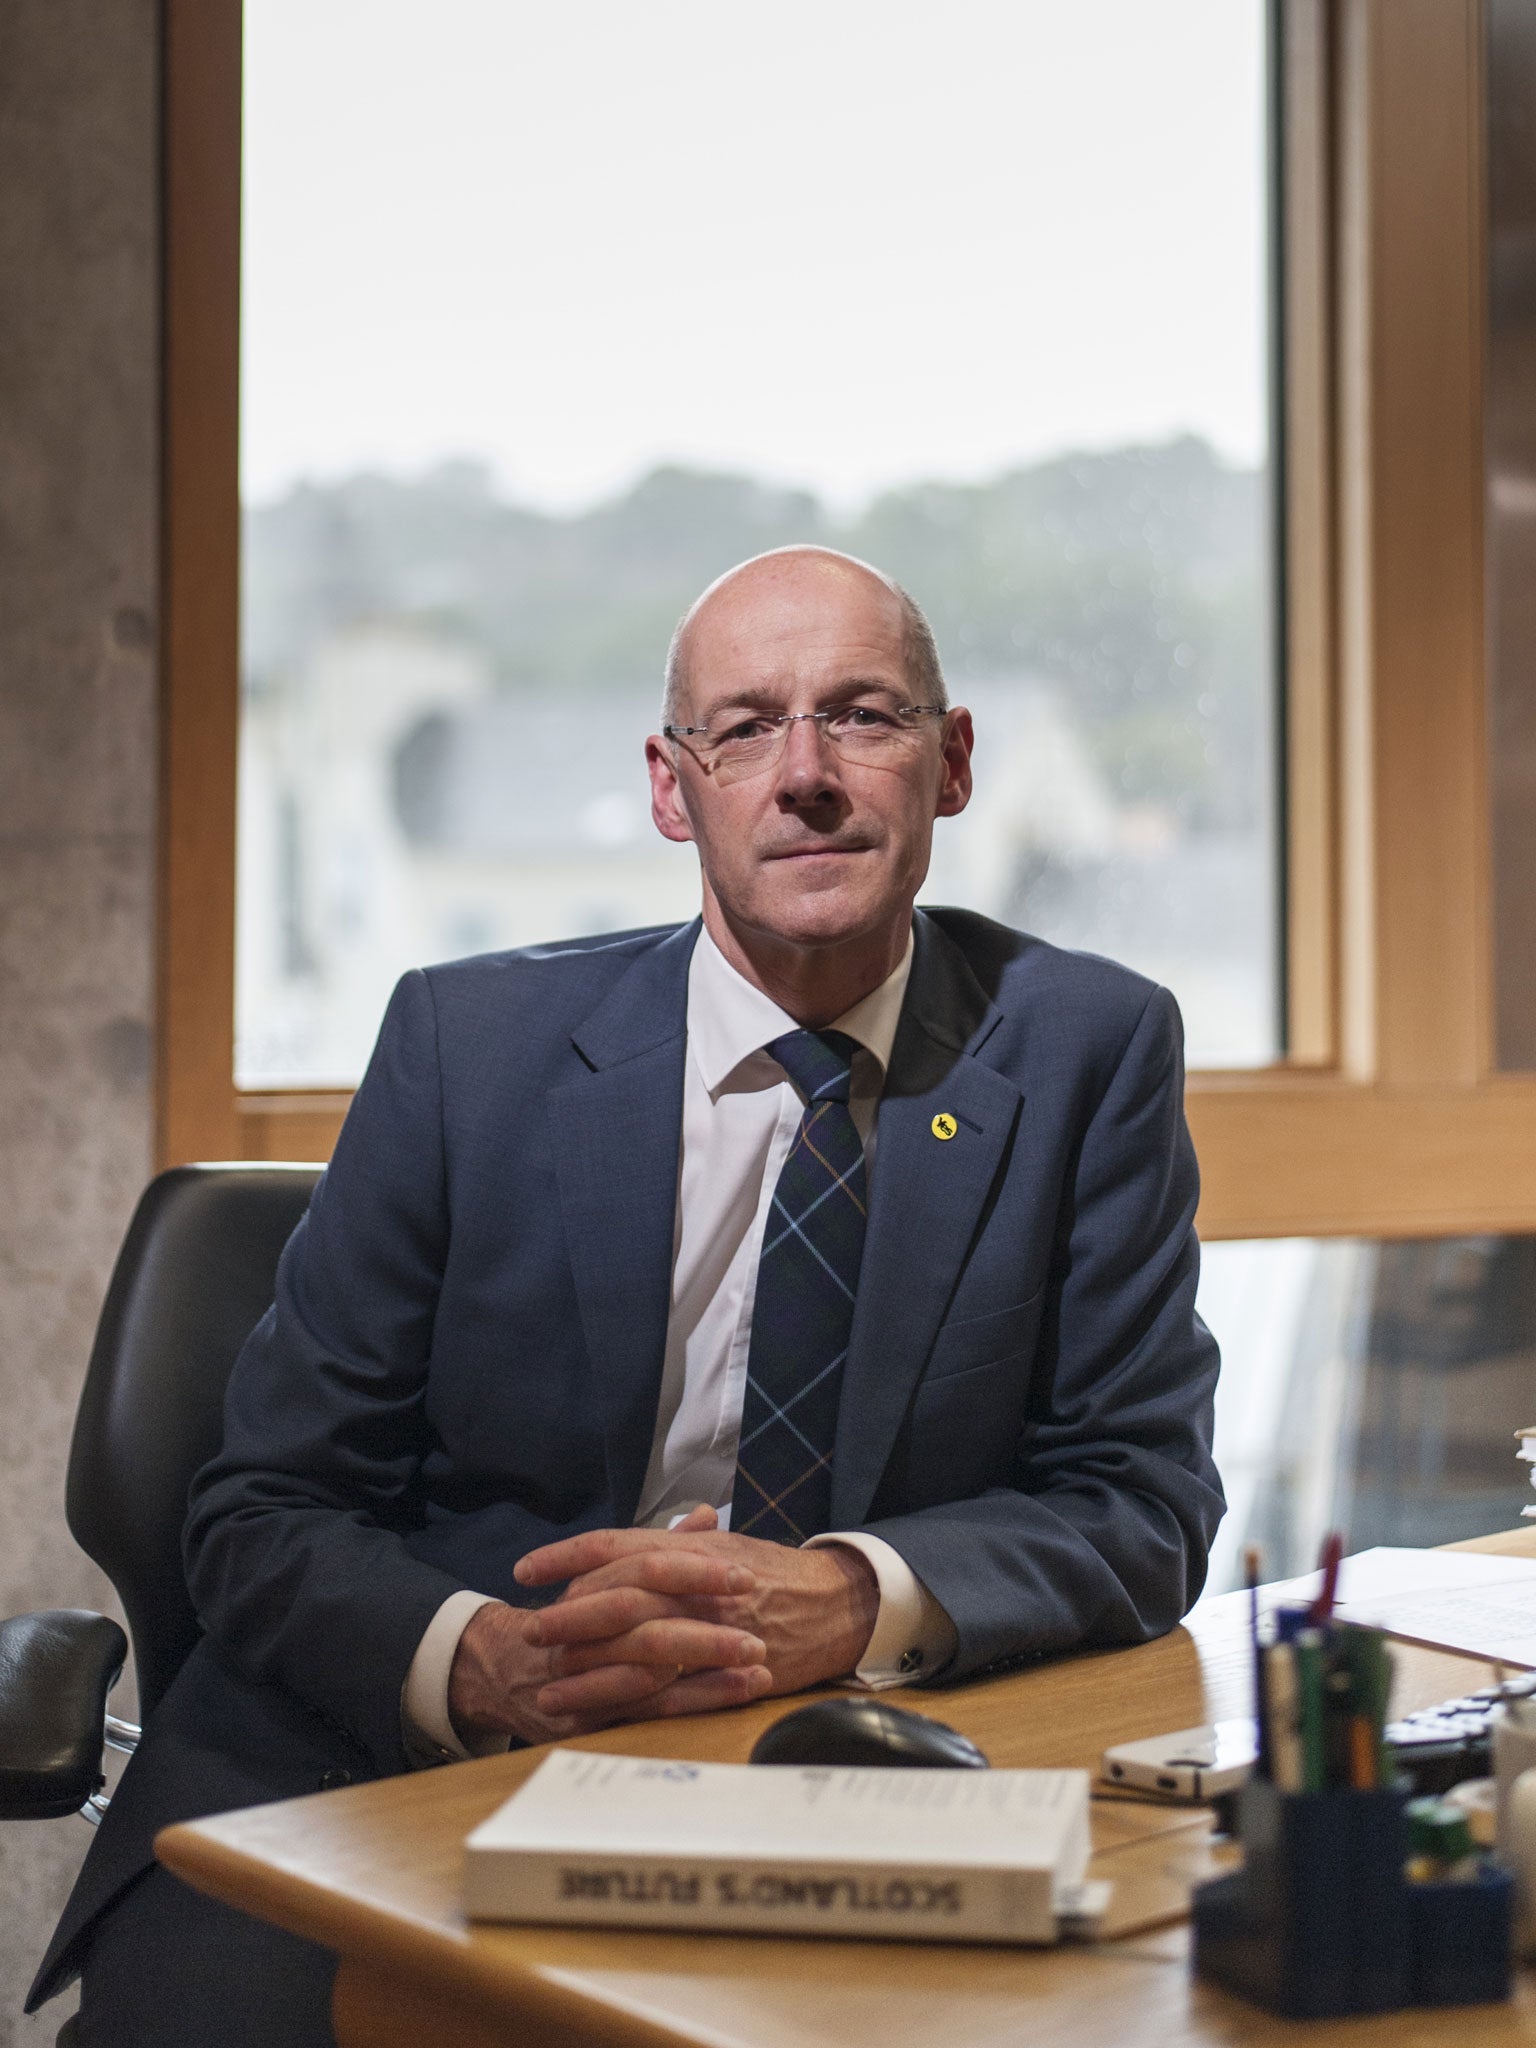 John Swinney, in his office at Holyrood, has pursued a free Scotland since he joined the SNP at 15